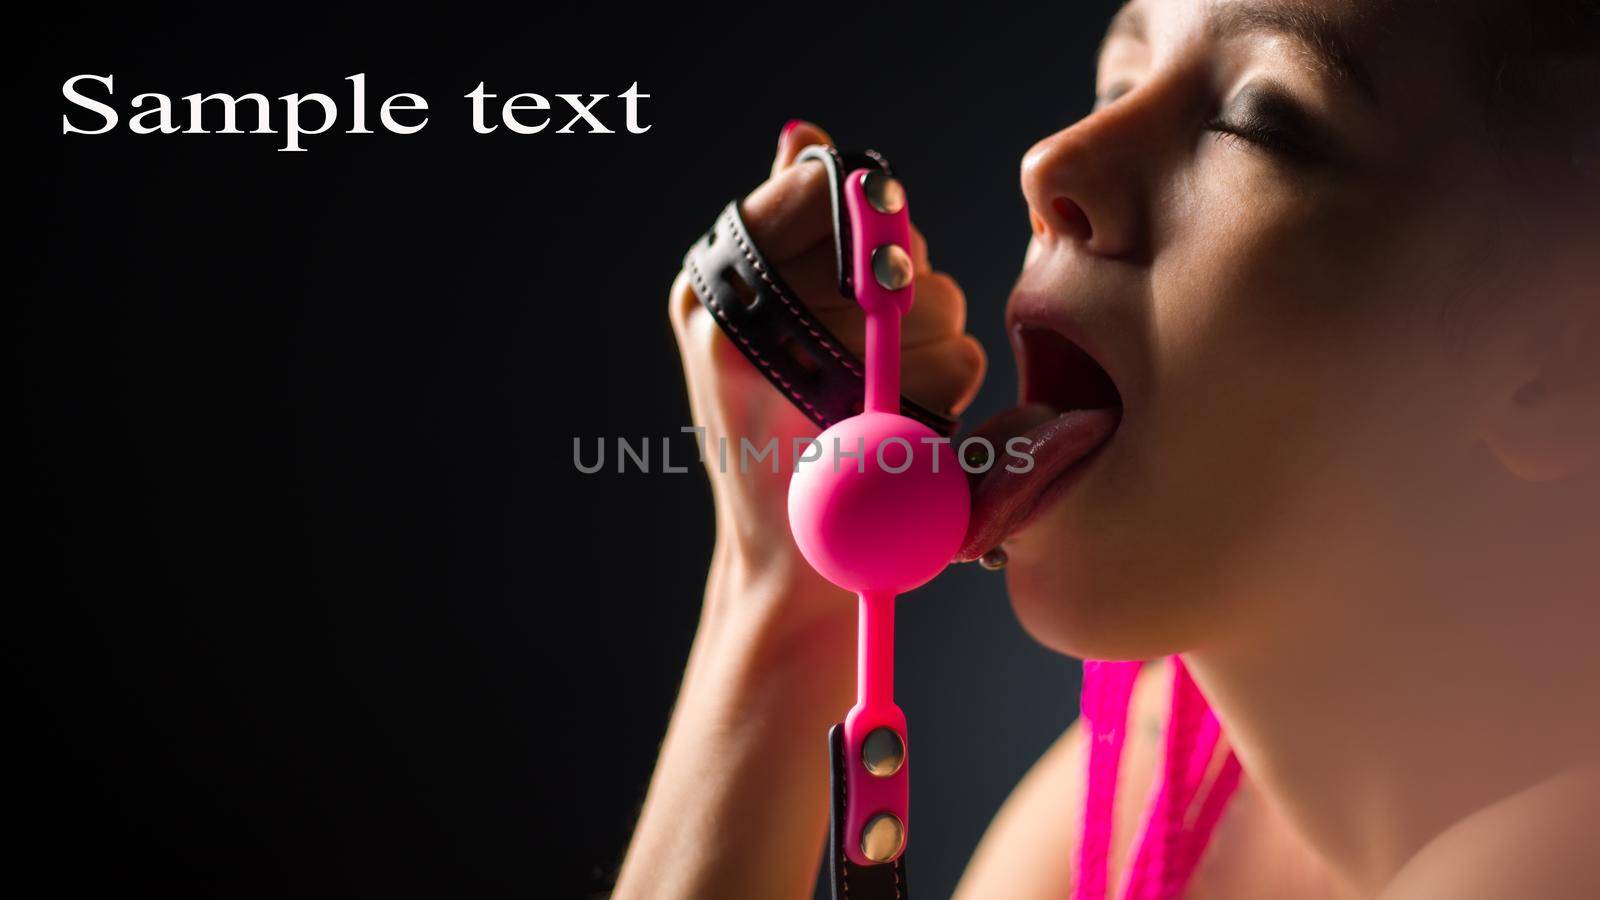 BDSM outfit for adult sex games. A young woman licks pink gag ball - image